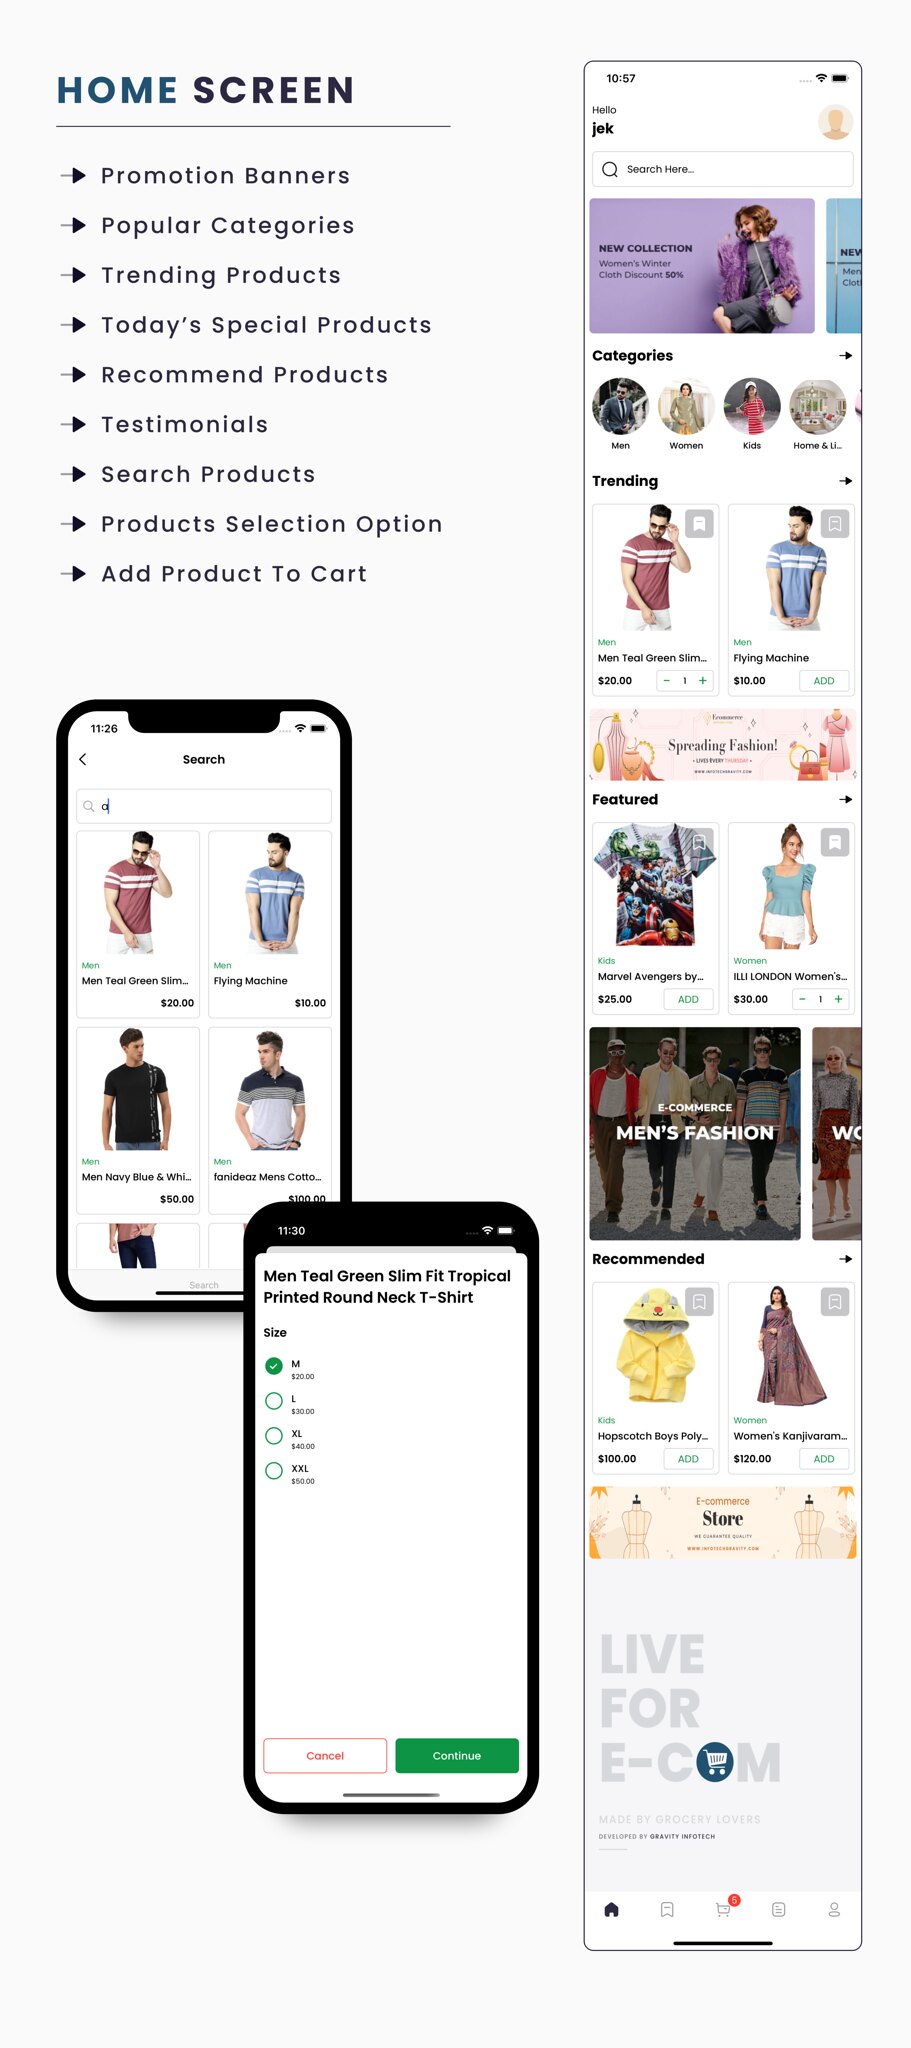 Single vendor eCommerce iOS User & Delivery Boy Apps With Backend Admin Panel - 6